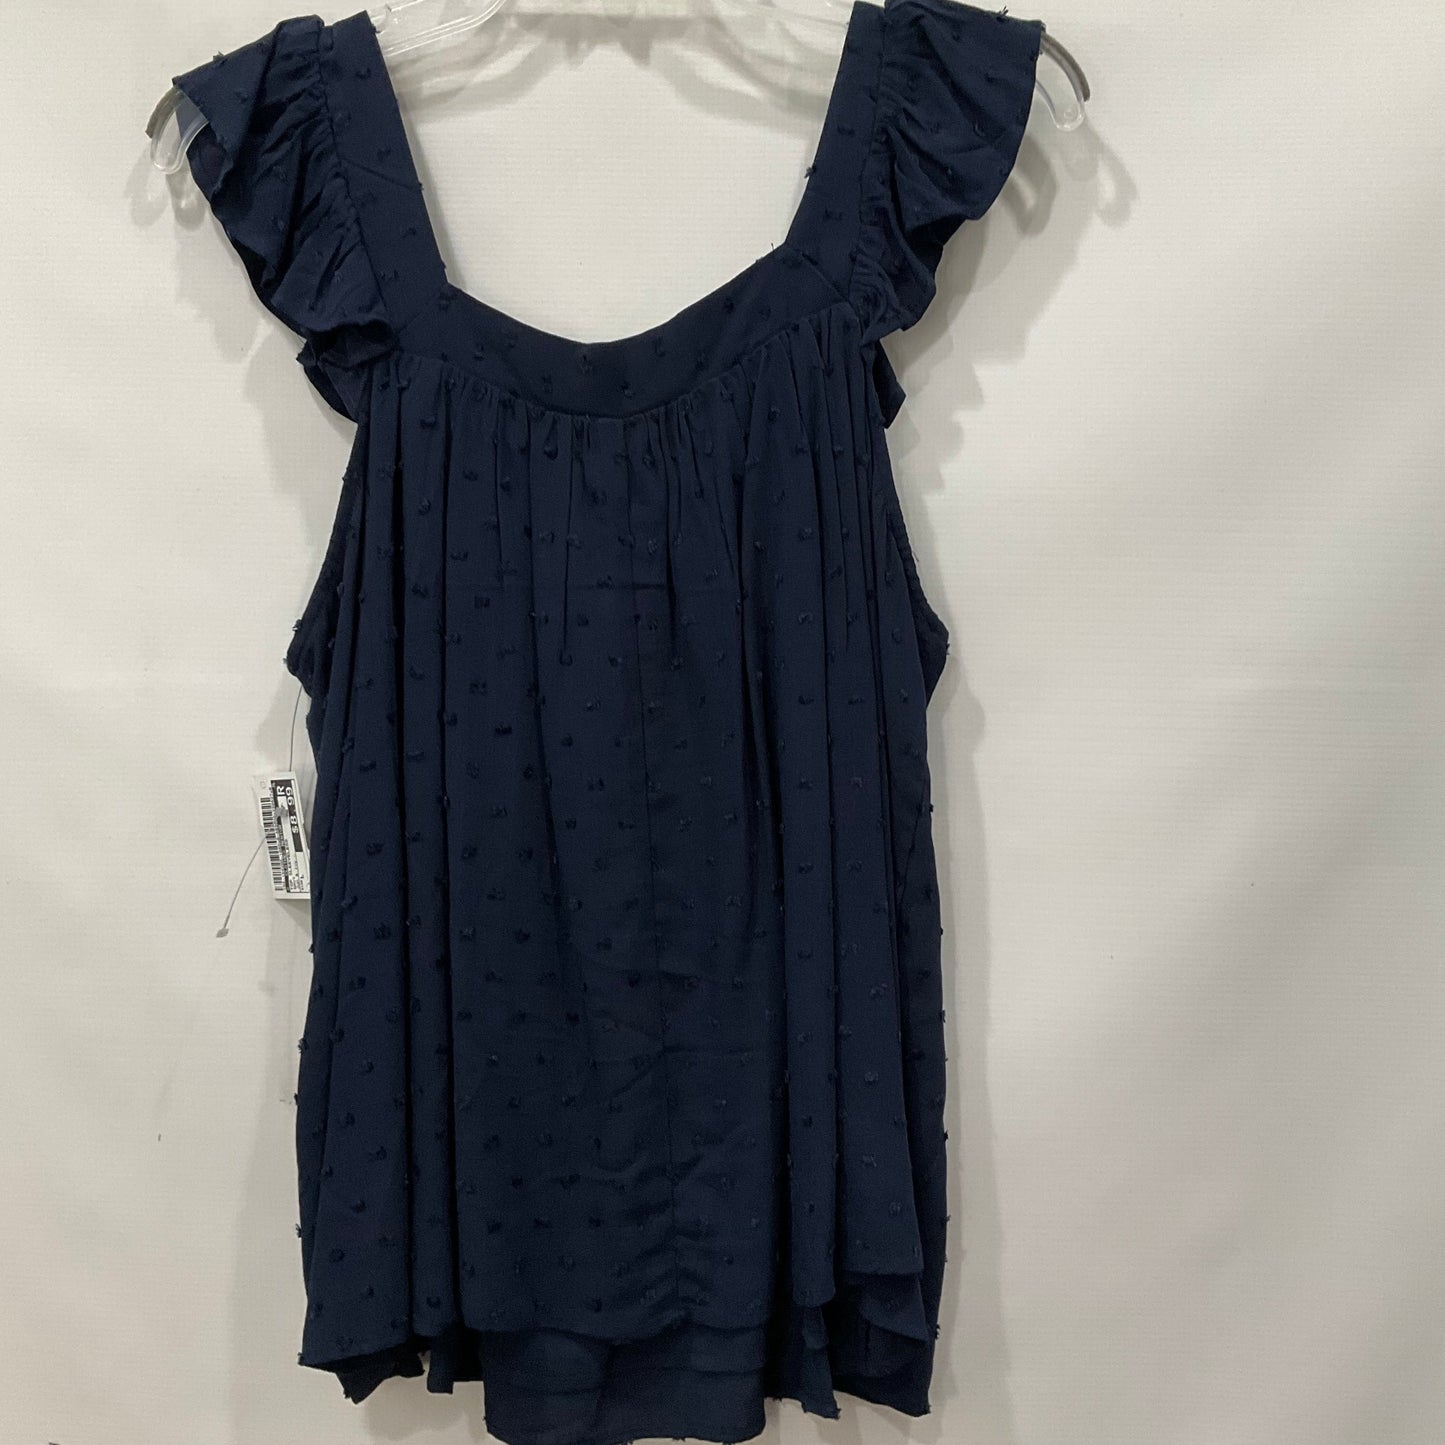 Navy Top Sleeveless Clothes Mentor, Size L